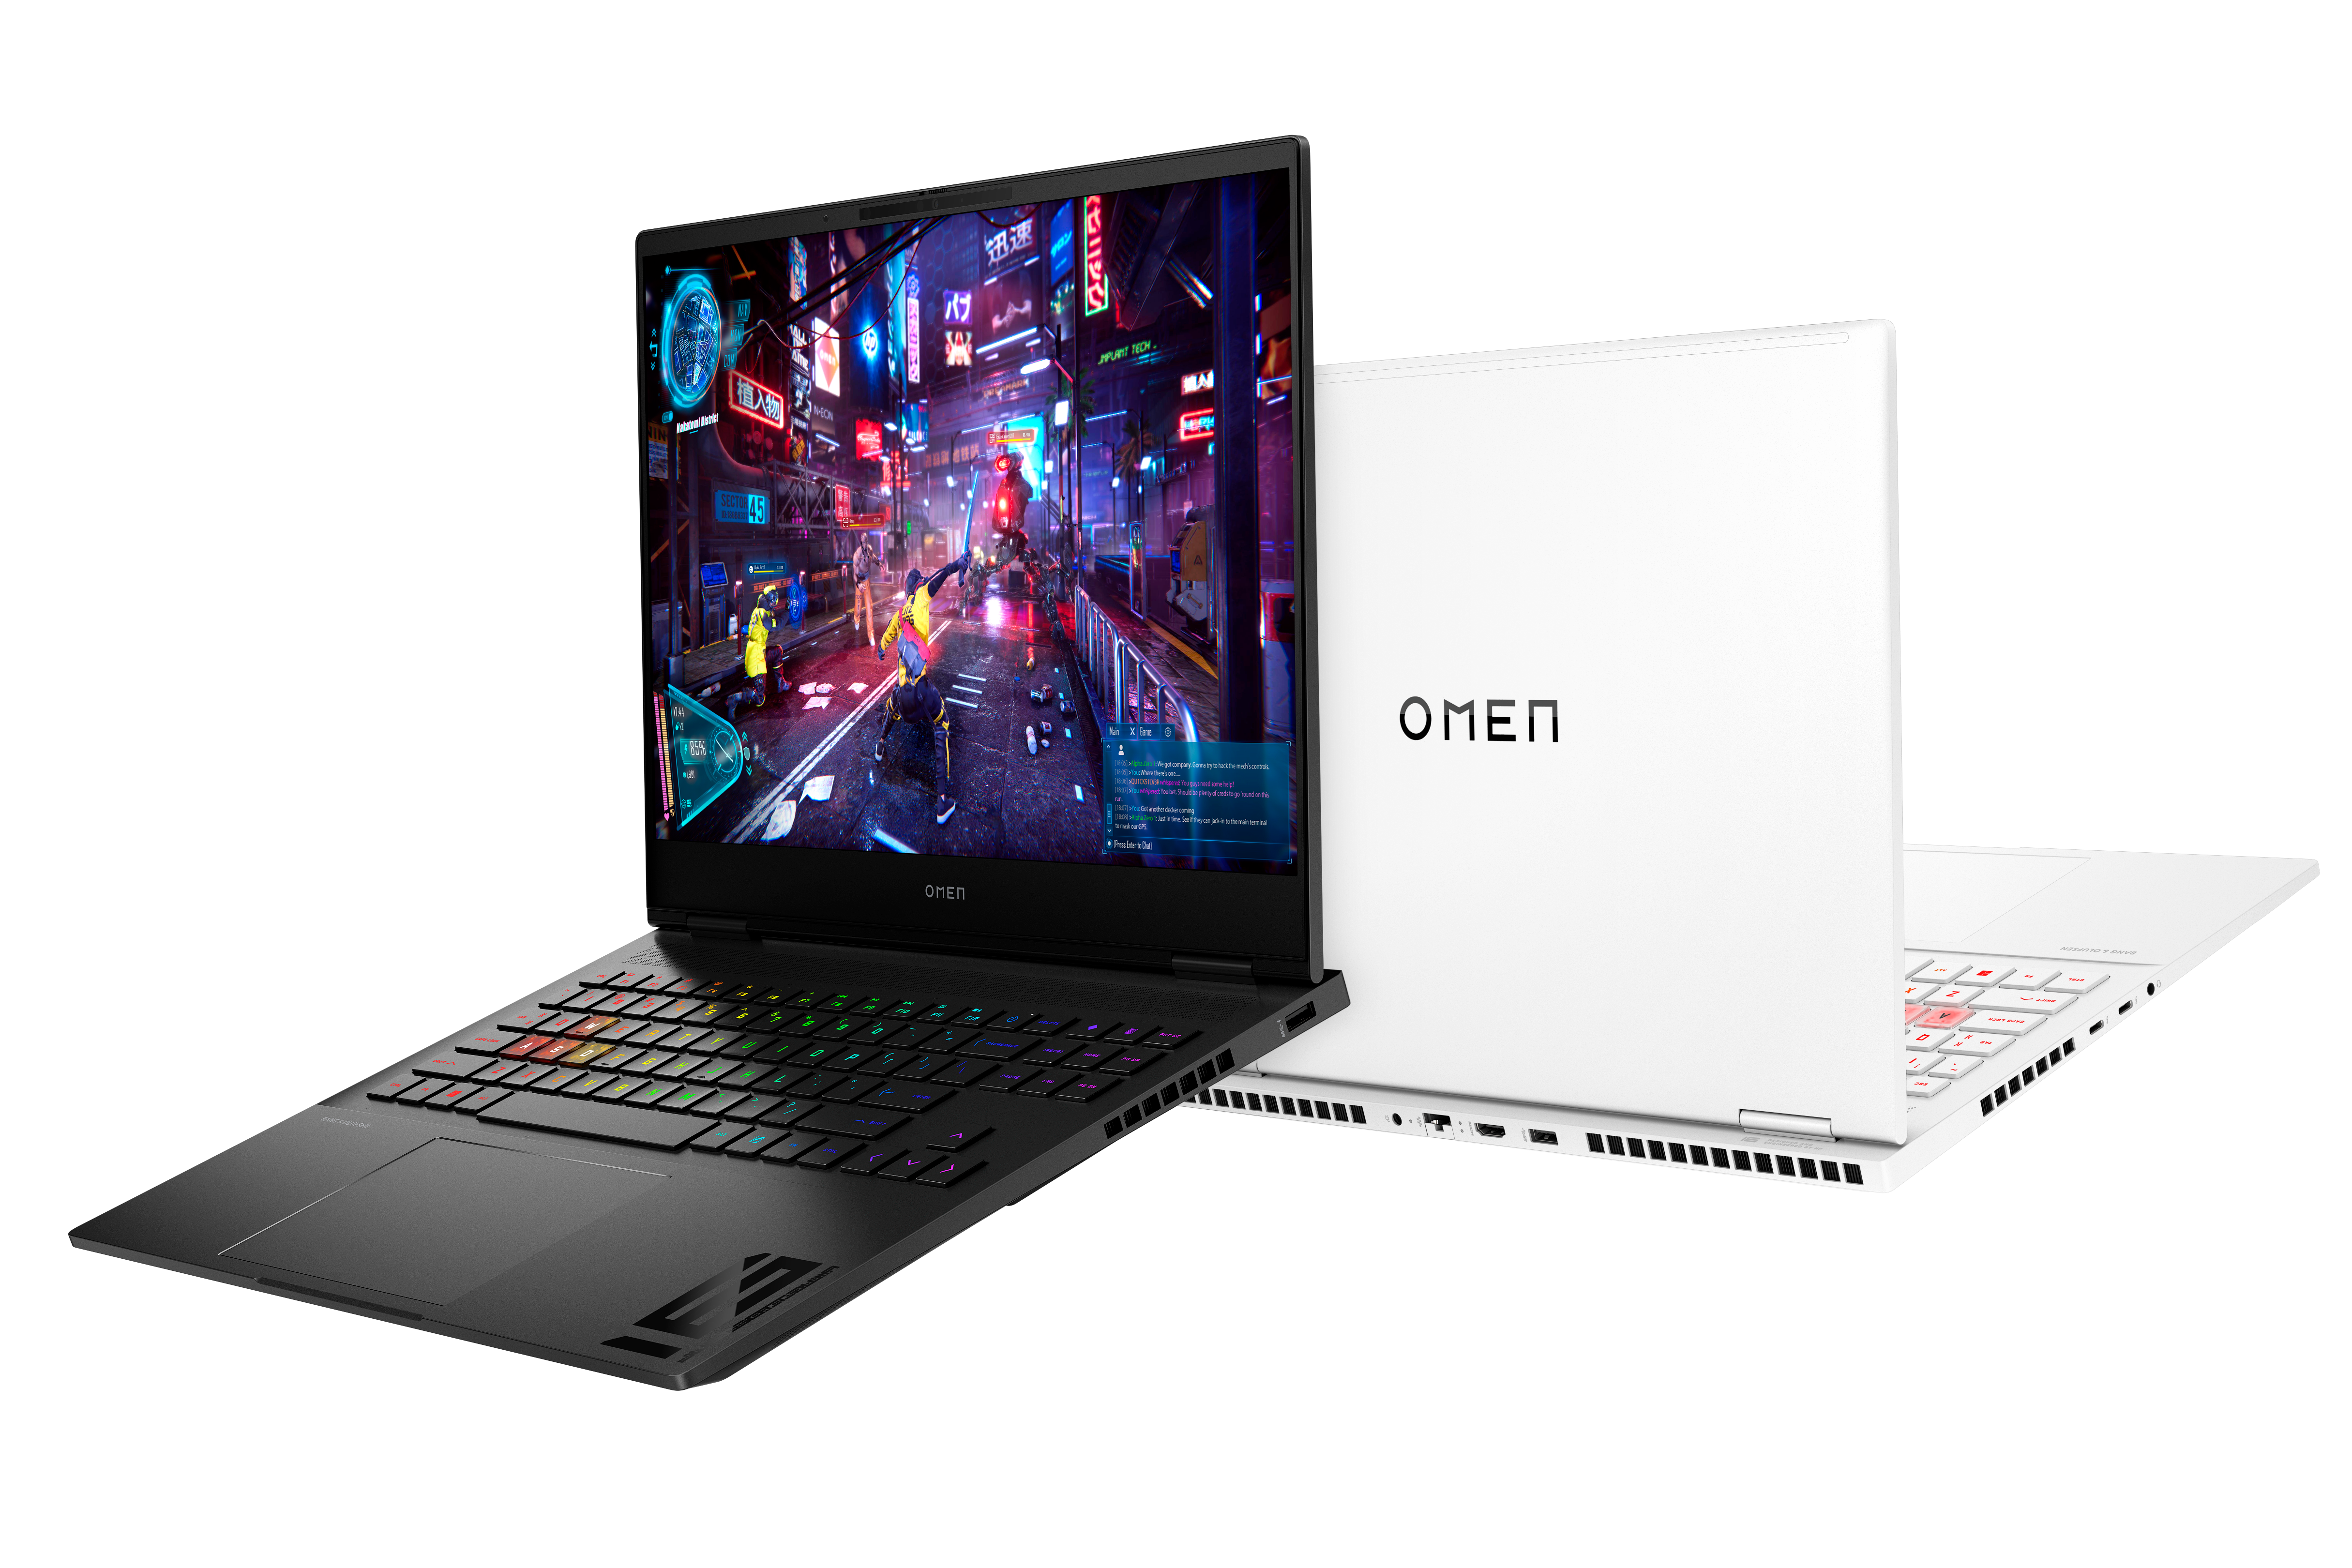 Two Omen Transcend 16 laptops, one in white and one in black